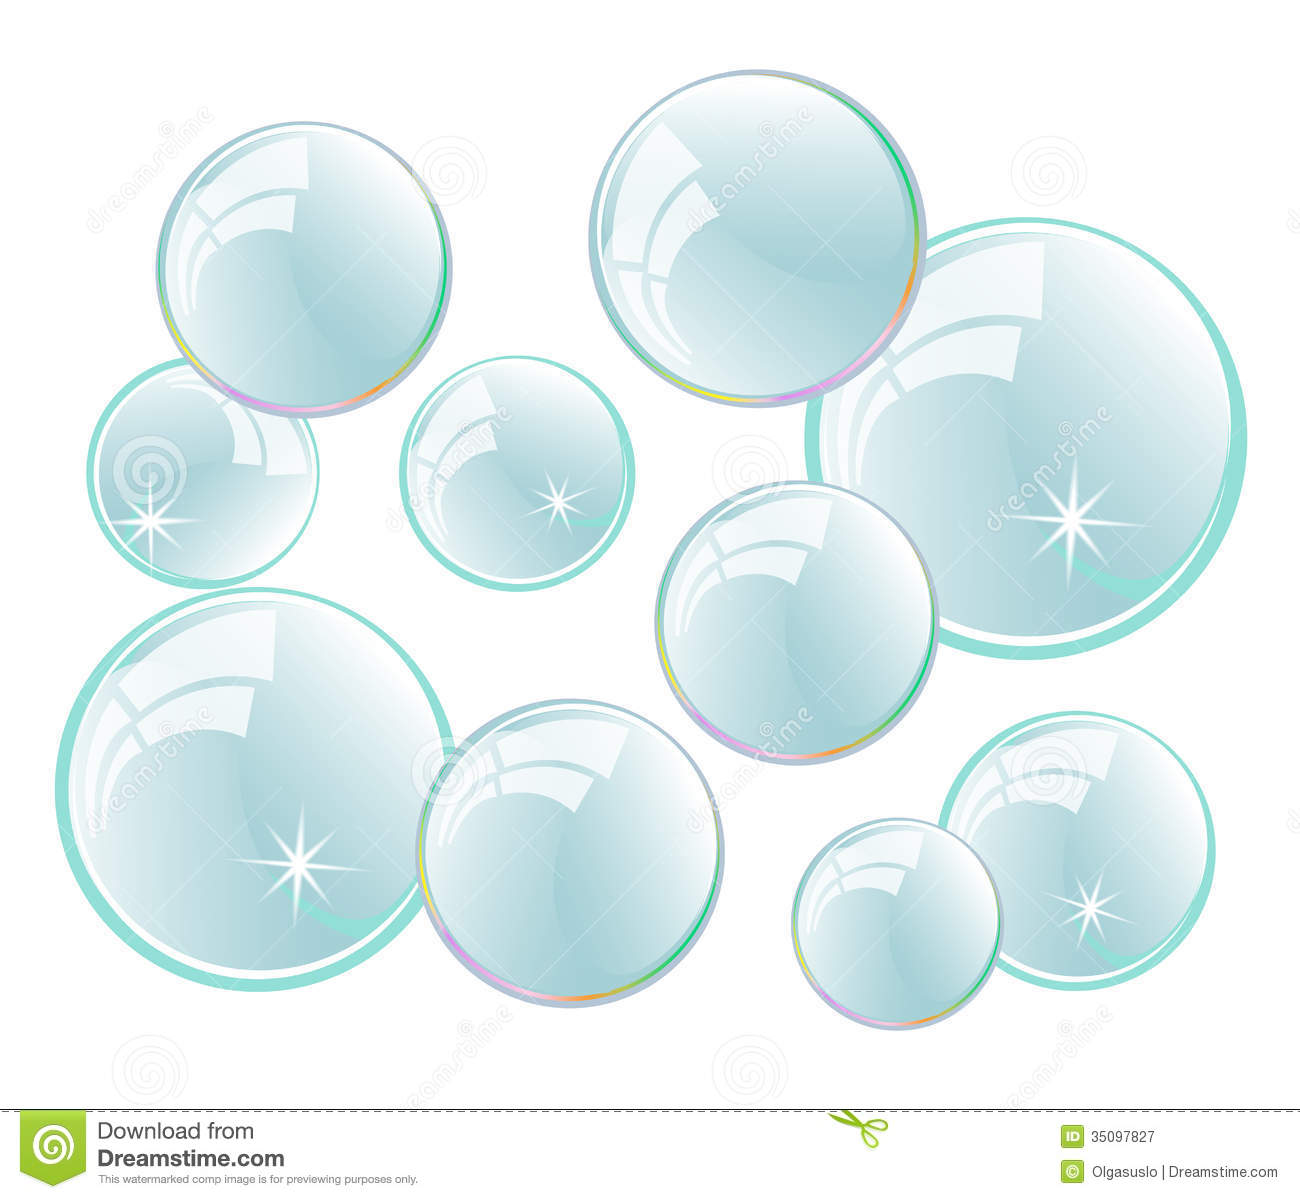 Soap Bubbles Royalty Free Stock Photography   Image  35097827